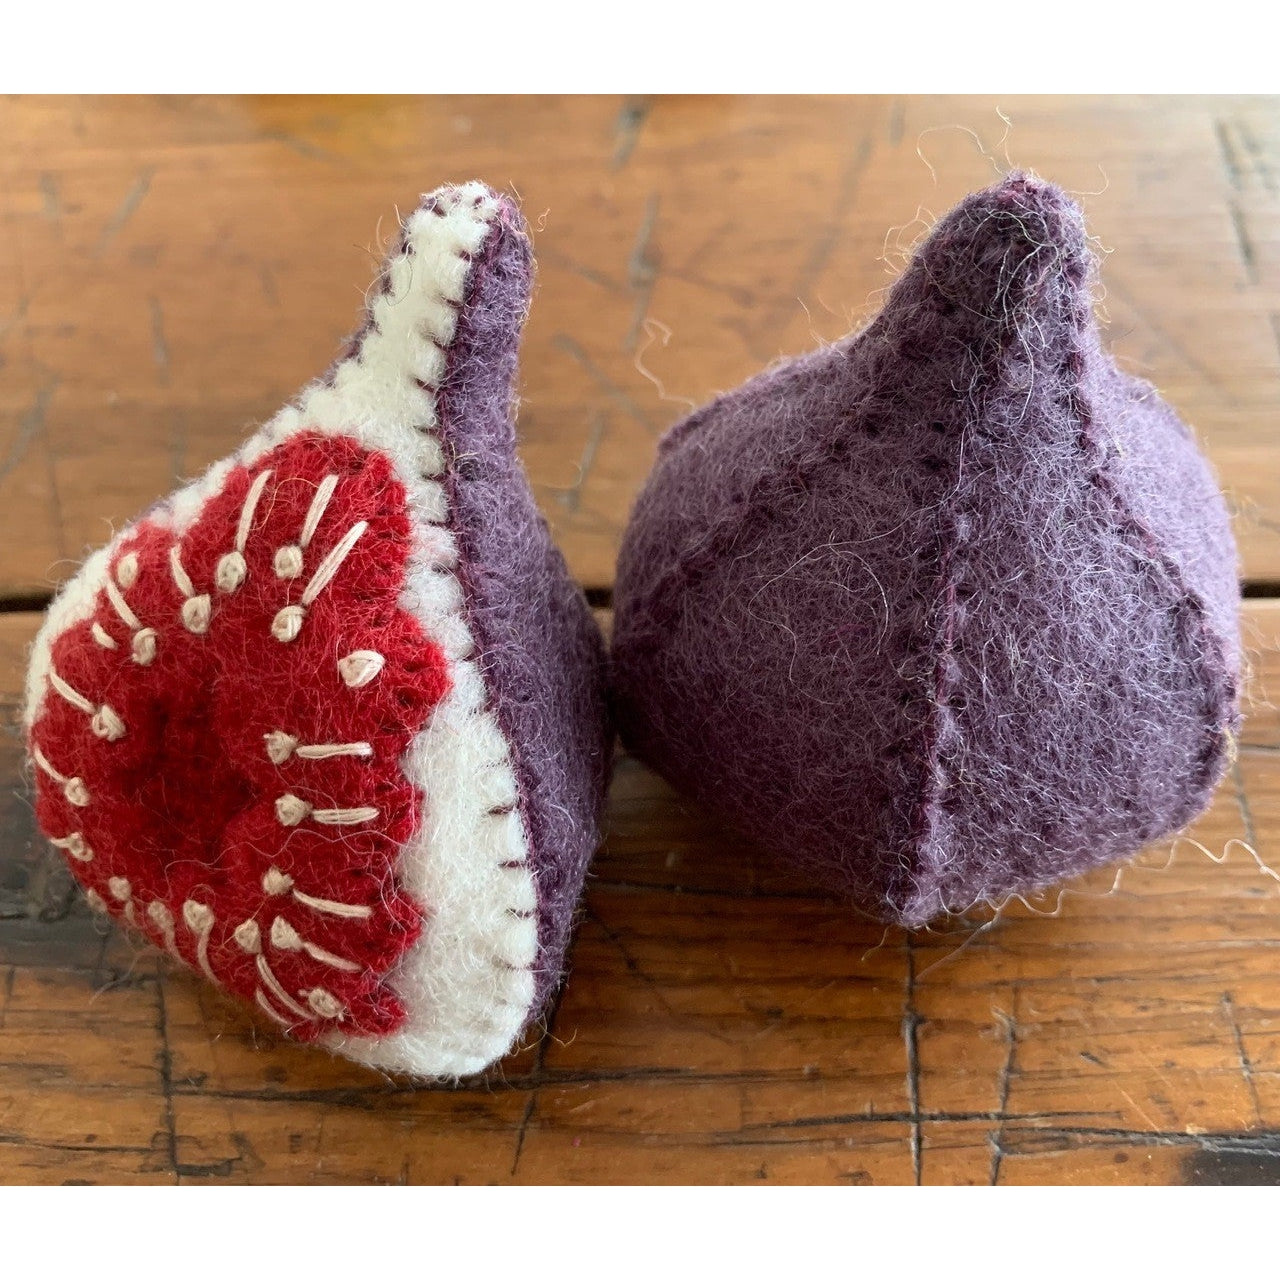 Papoose Fruit - Fig - 2 Pieces (1 Full 1 Half)